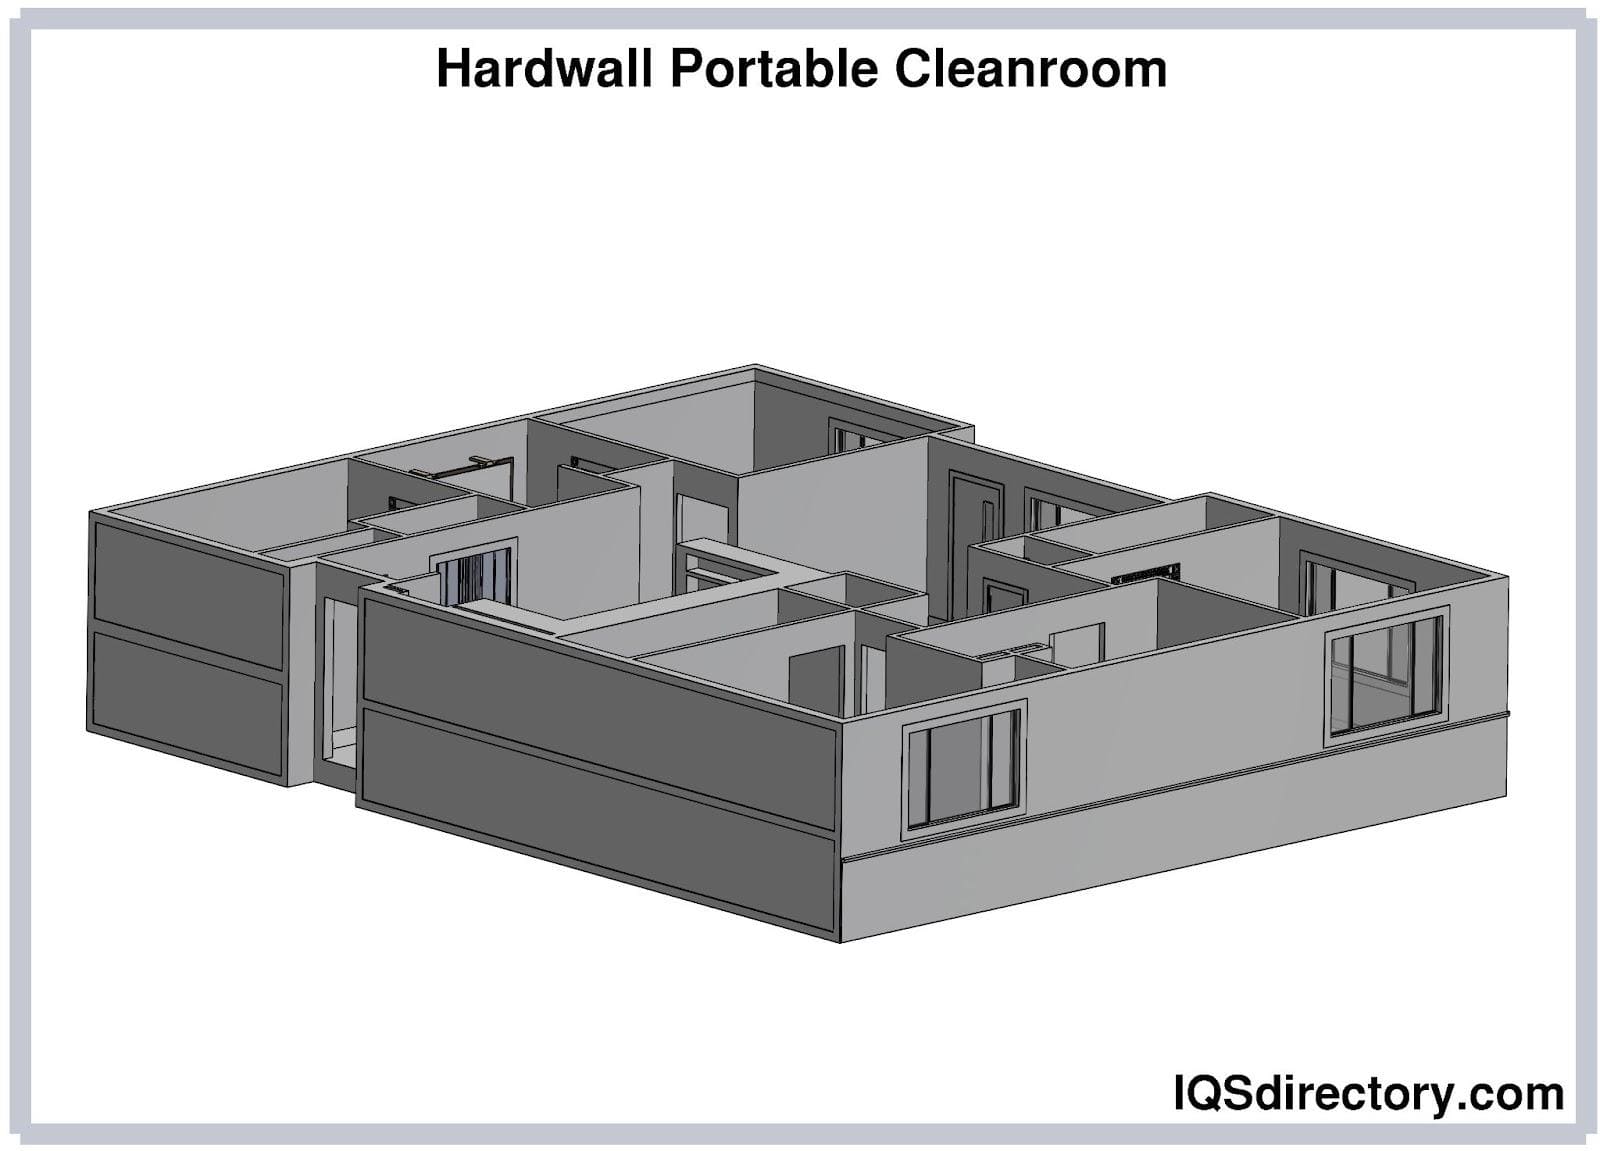 hardwall portable cleanrooms